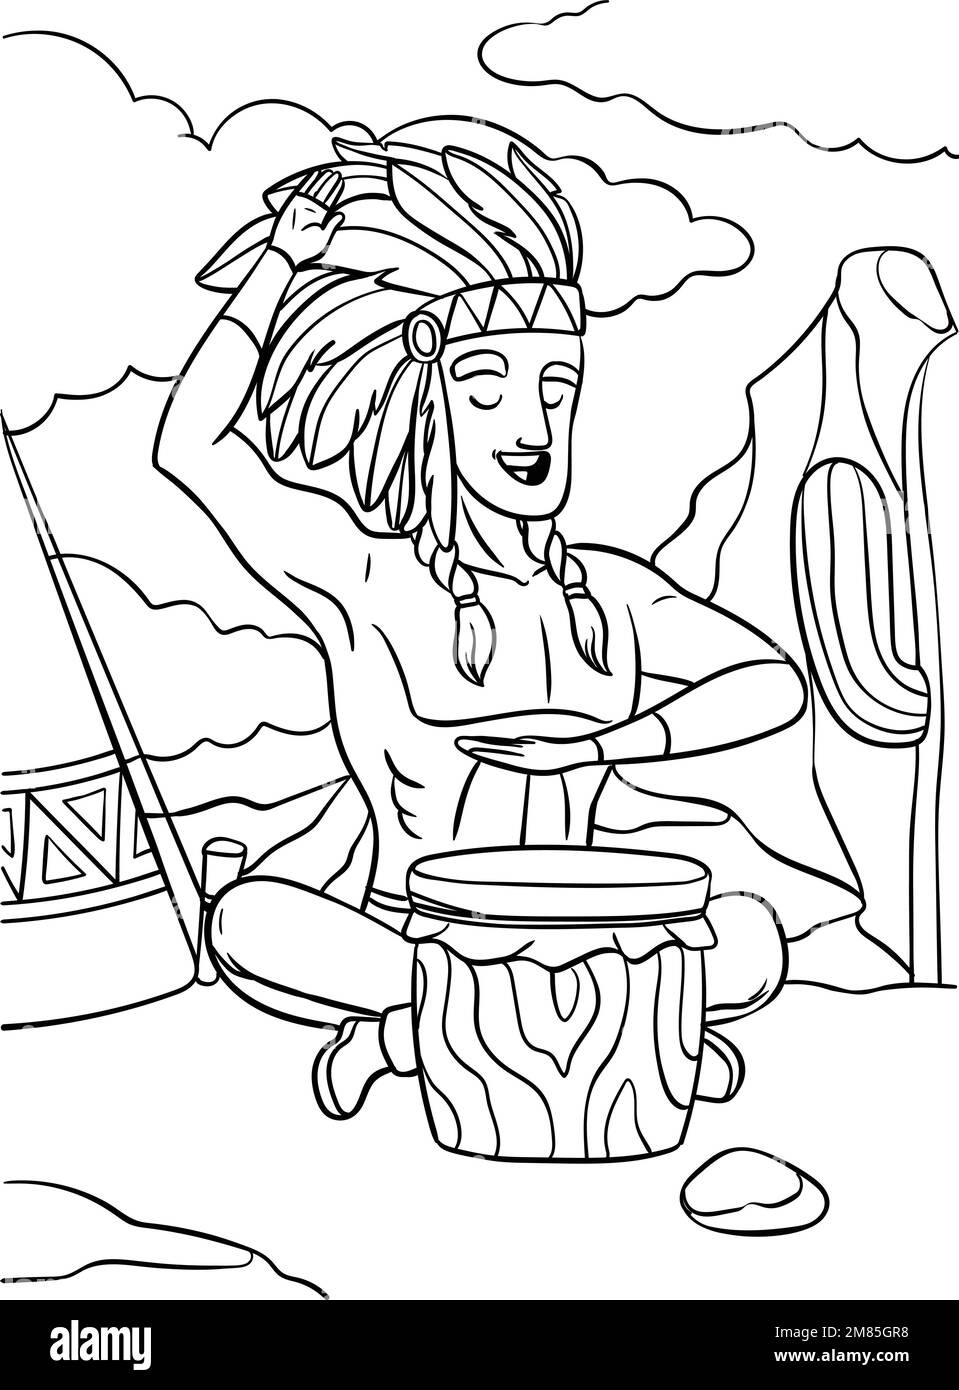 Native American Indian with Drum Coloring Page Stock Vector